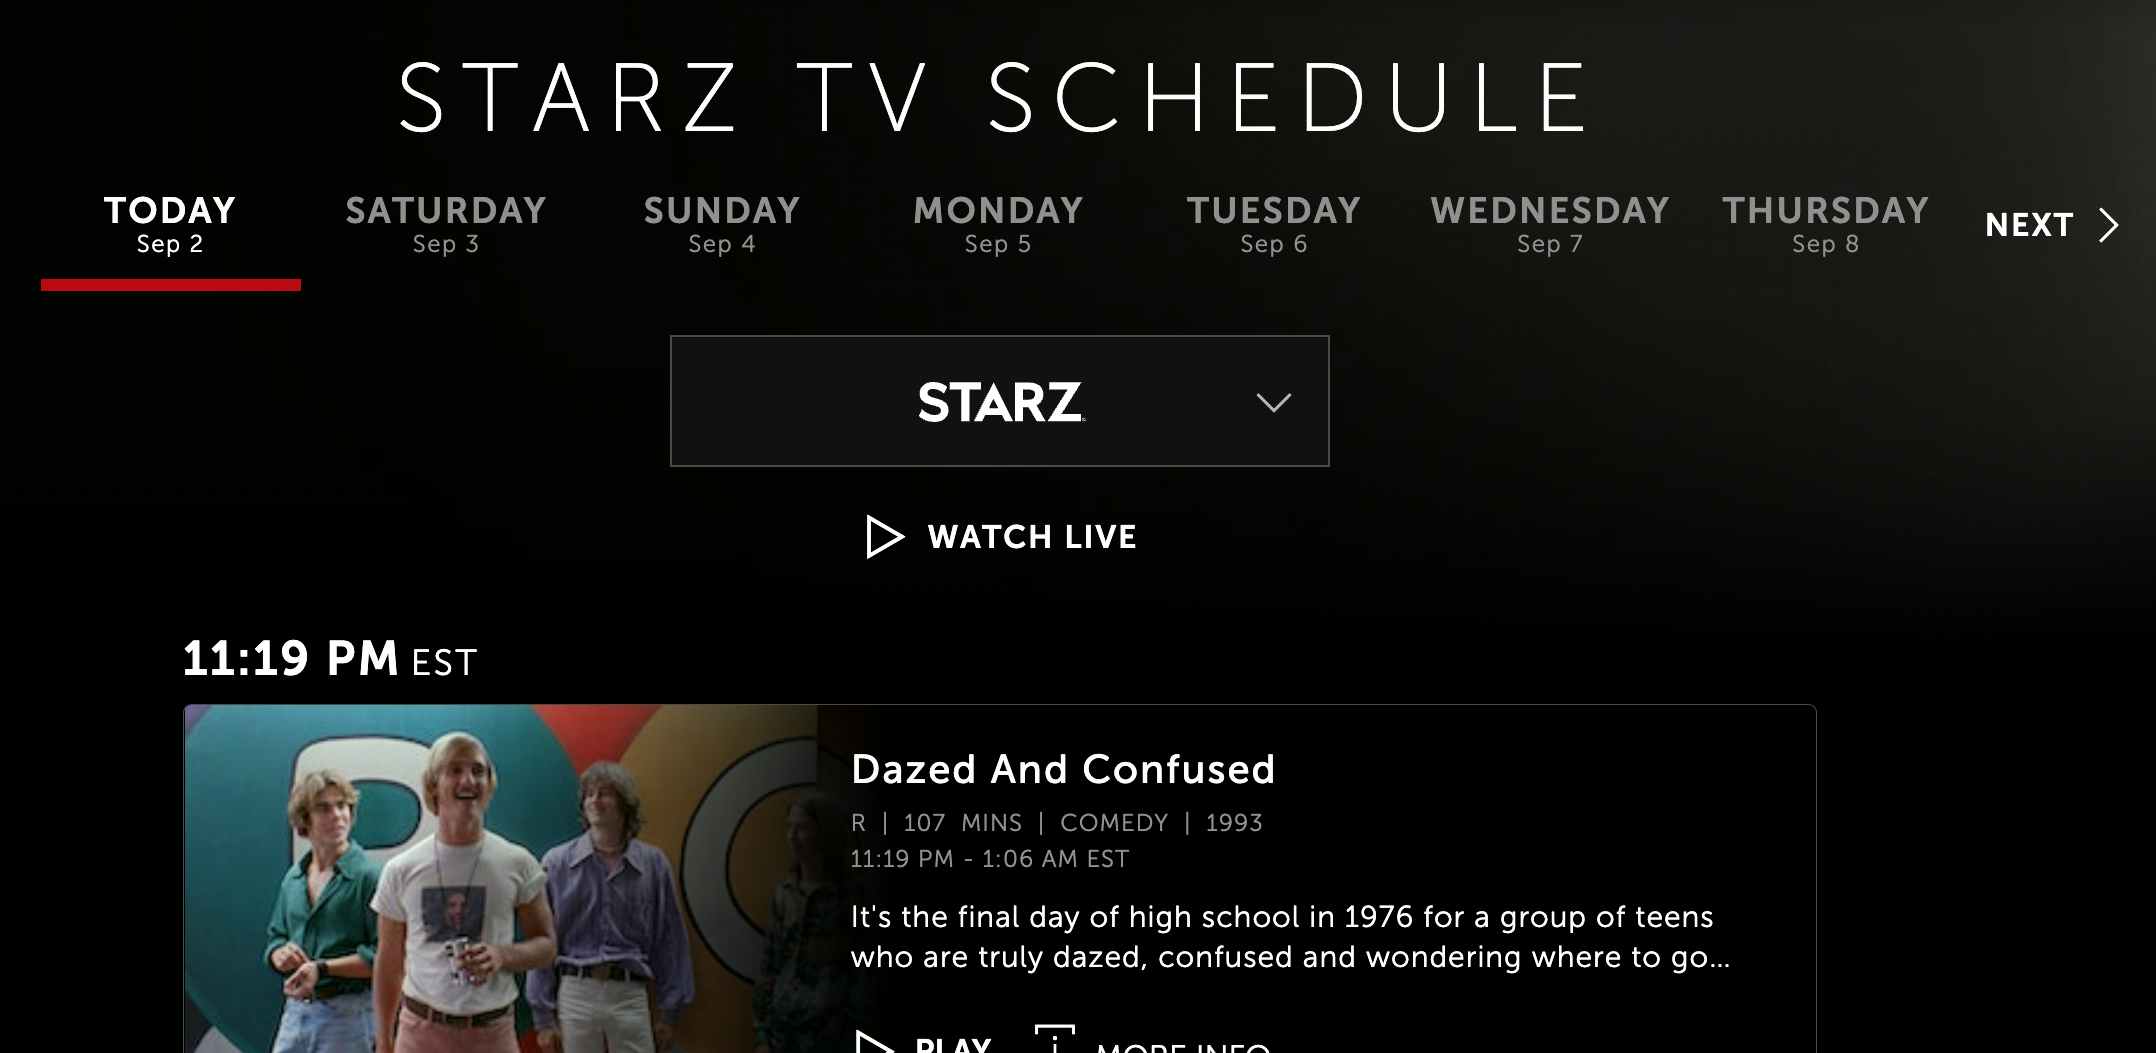 starz live schedule tv with dazed and confused movie